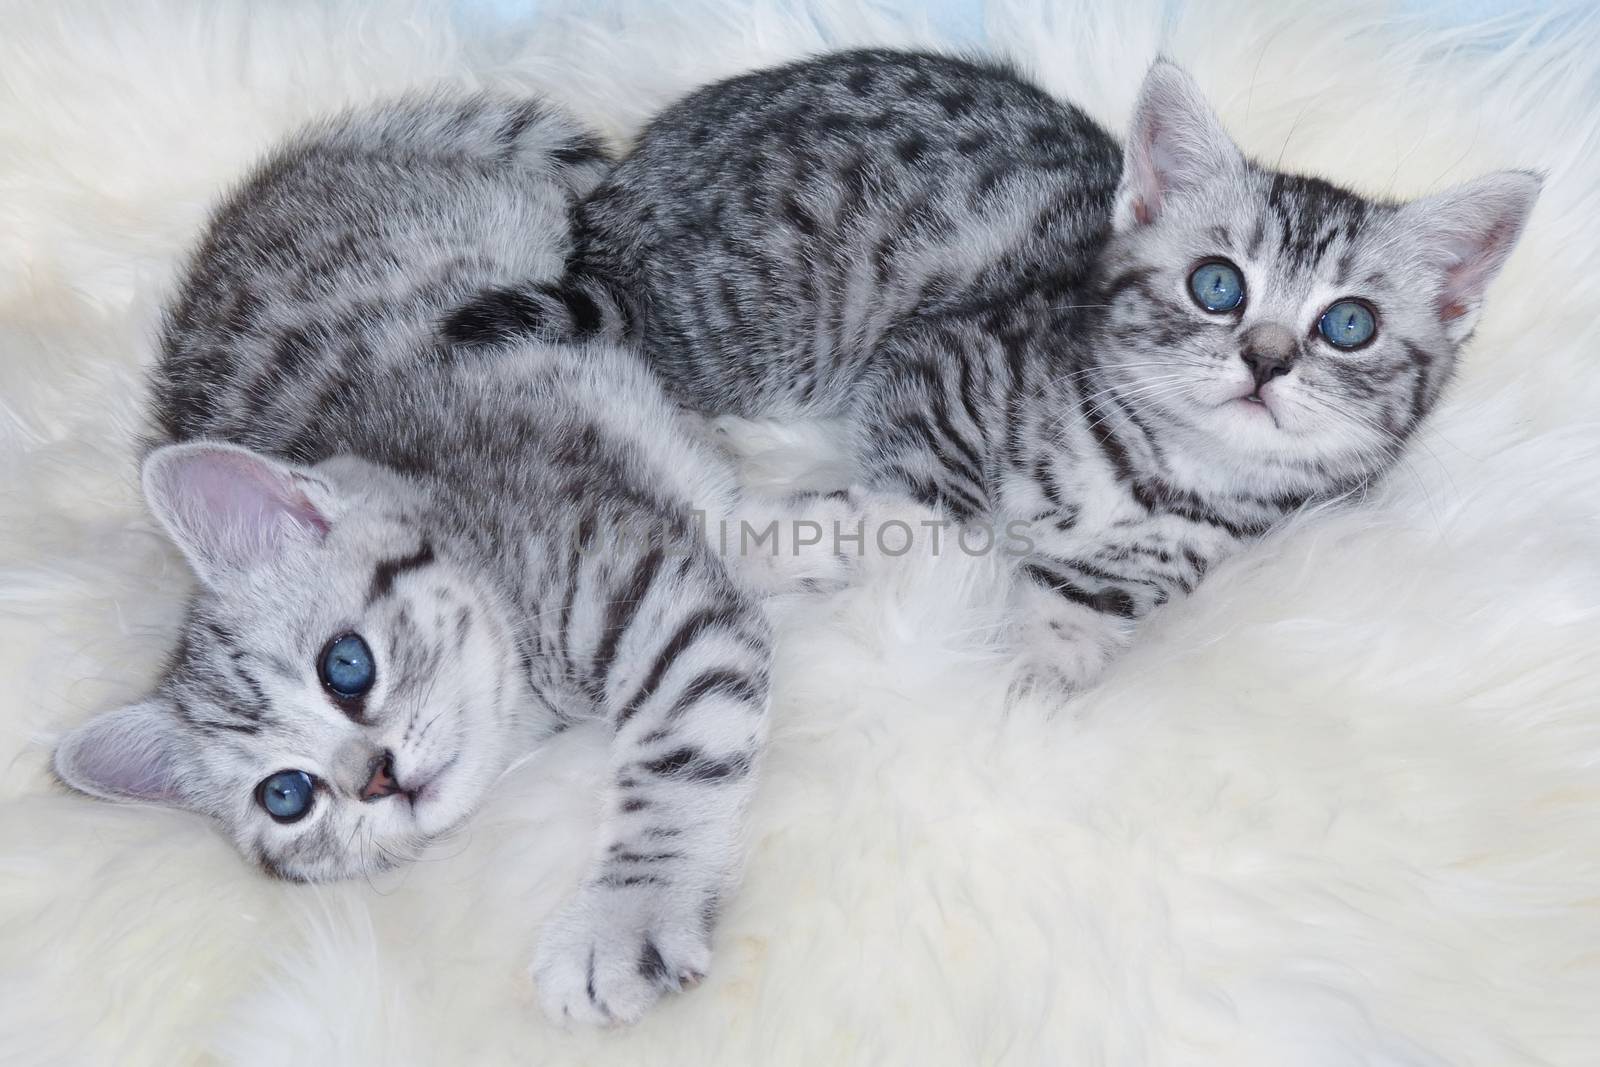 Two young black silver tabby cats lying lazy together on sheep f by BenSchonewille